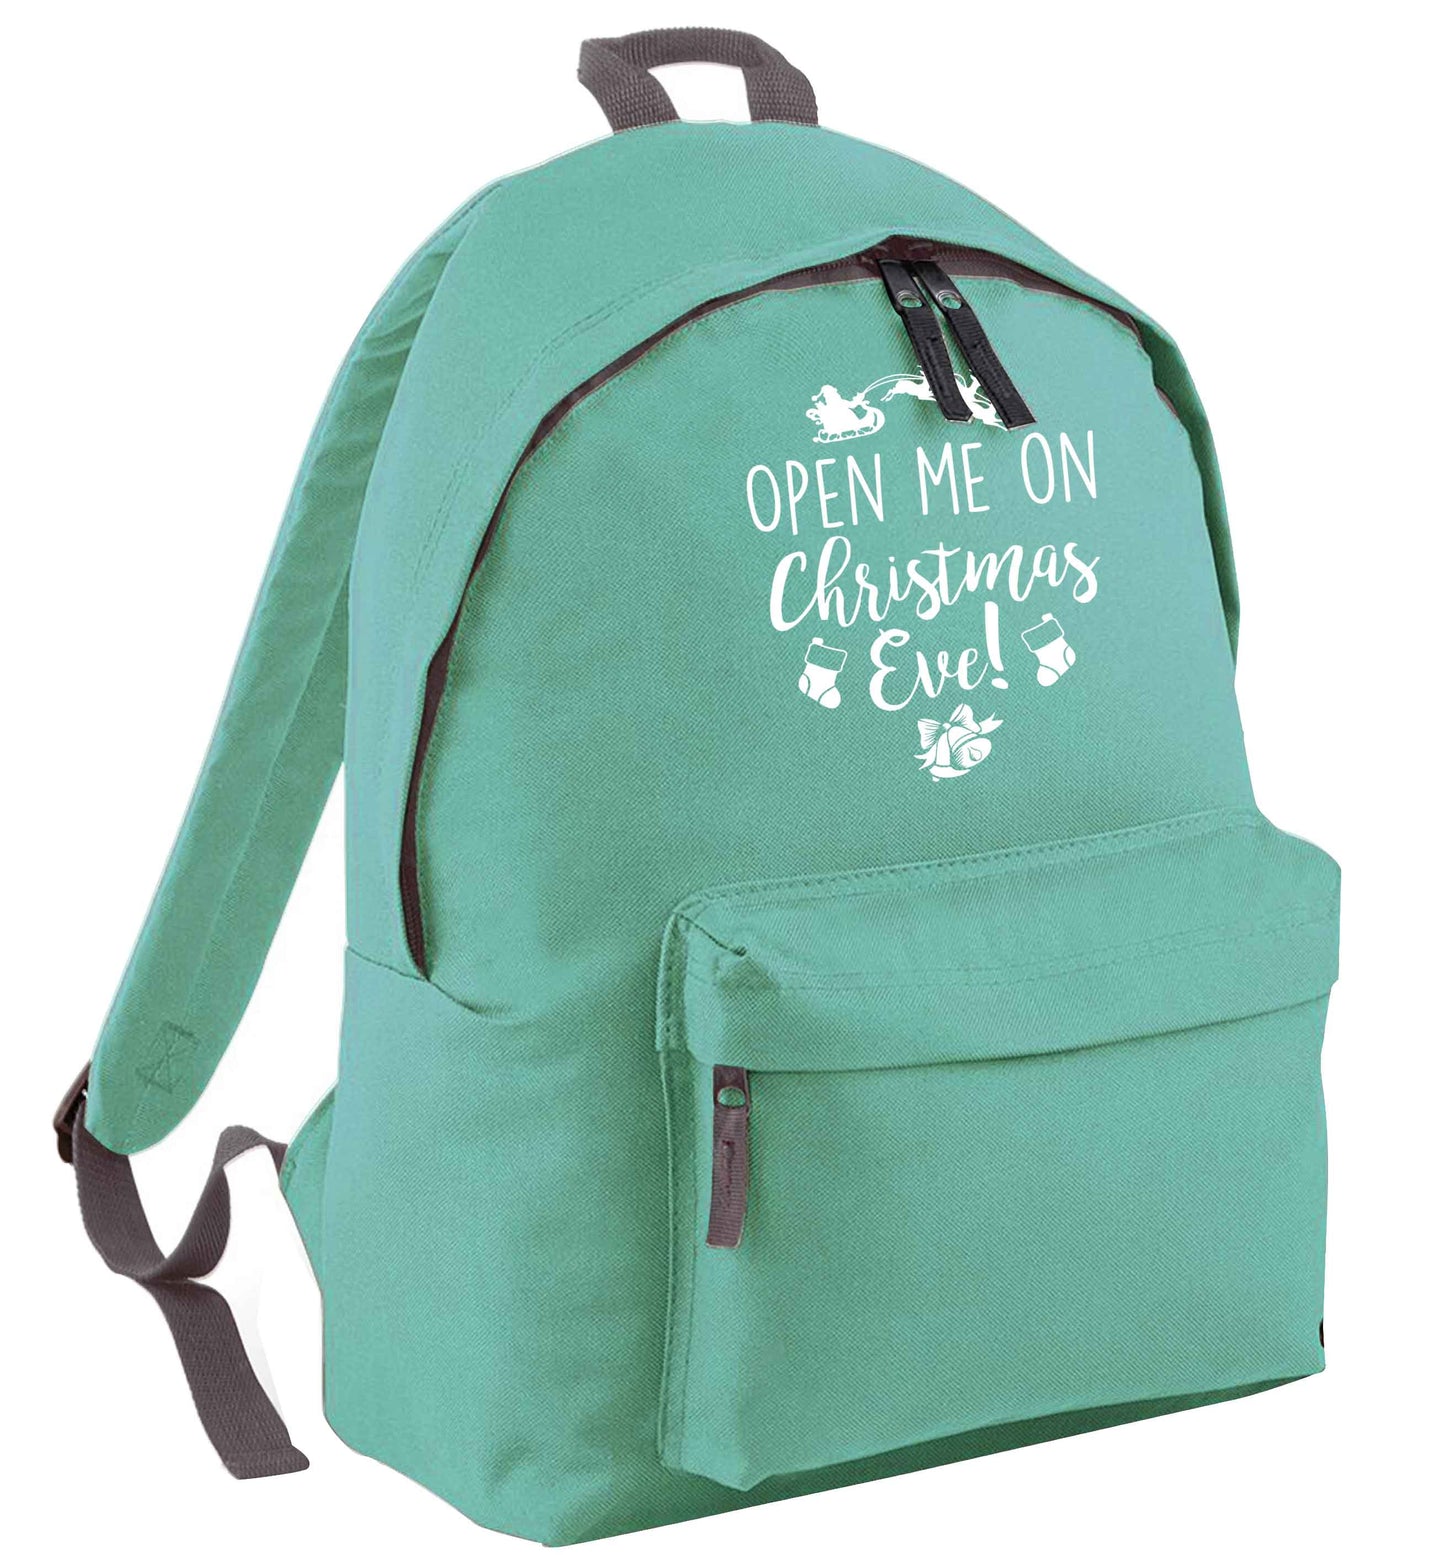 Open me on Christmas Day mint adults backpack